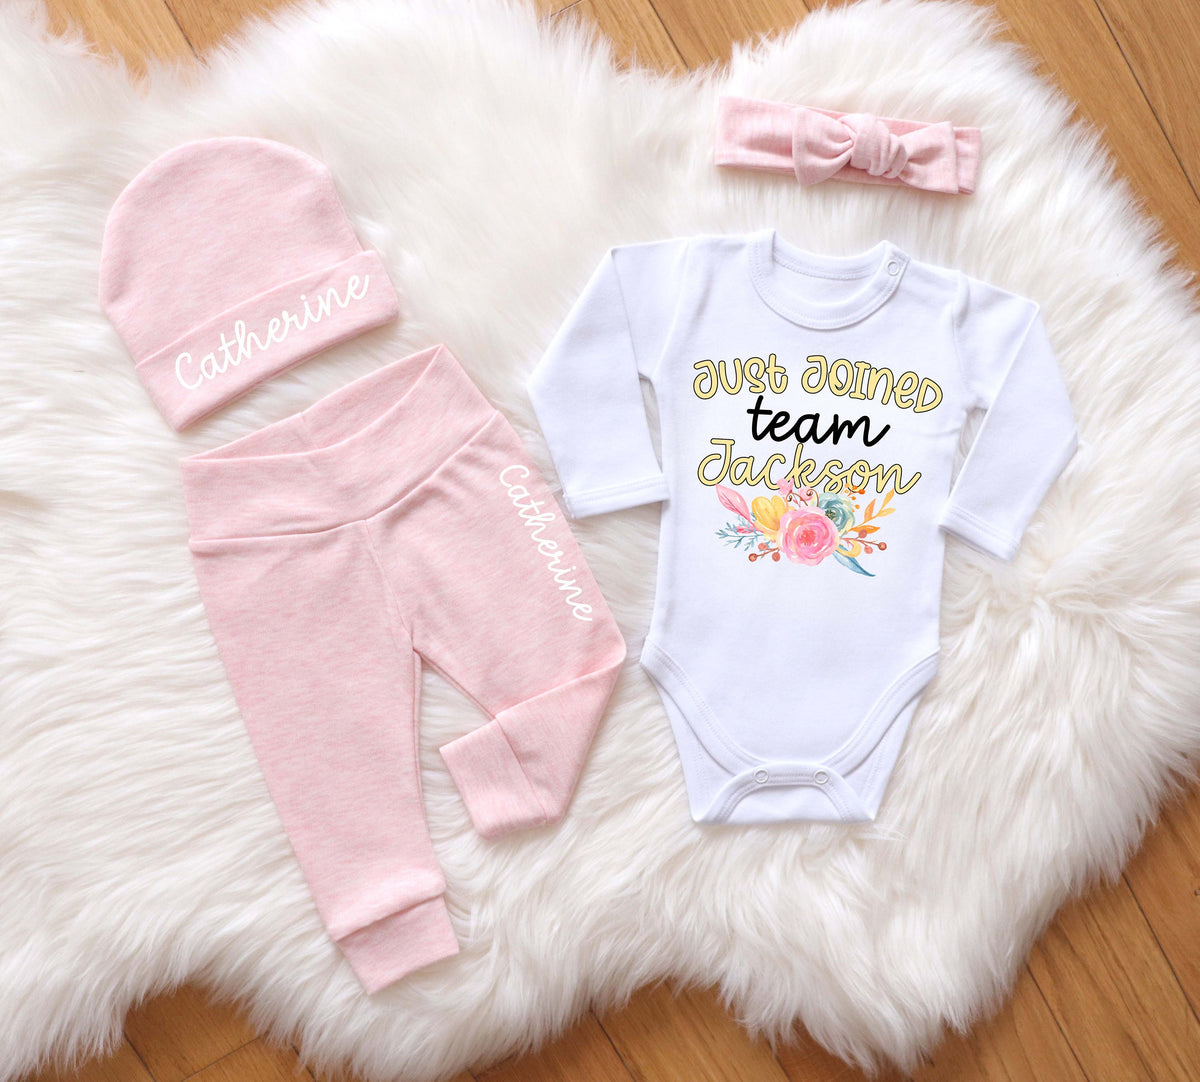 Personalized 'Just Joined Team' Coming Home Outfit - Peach